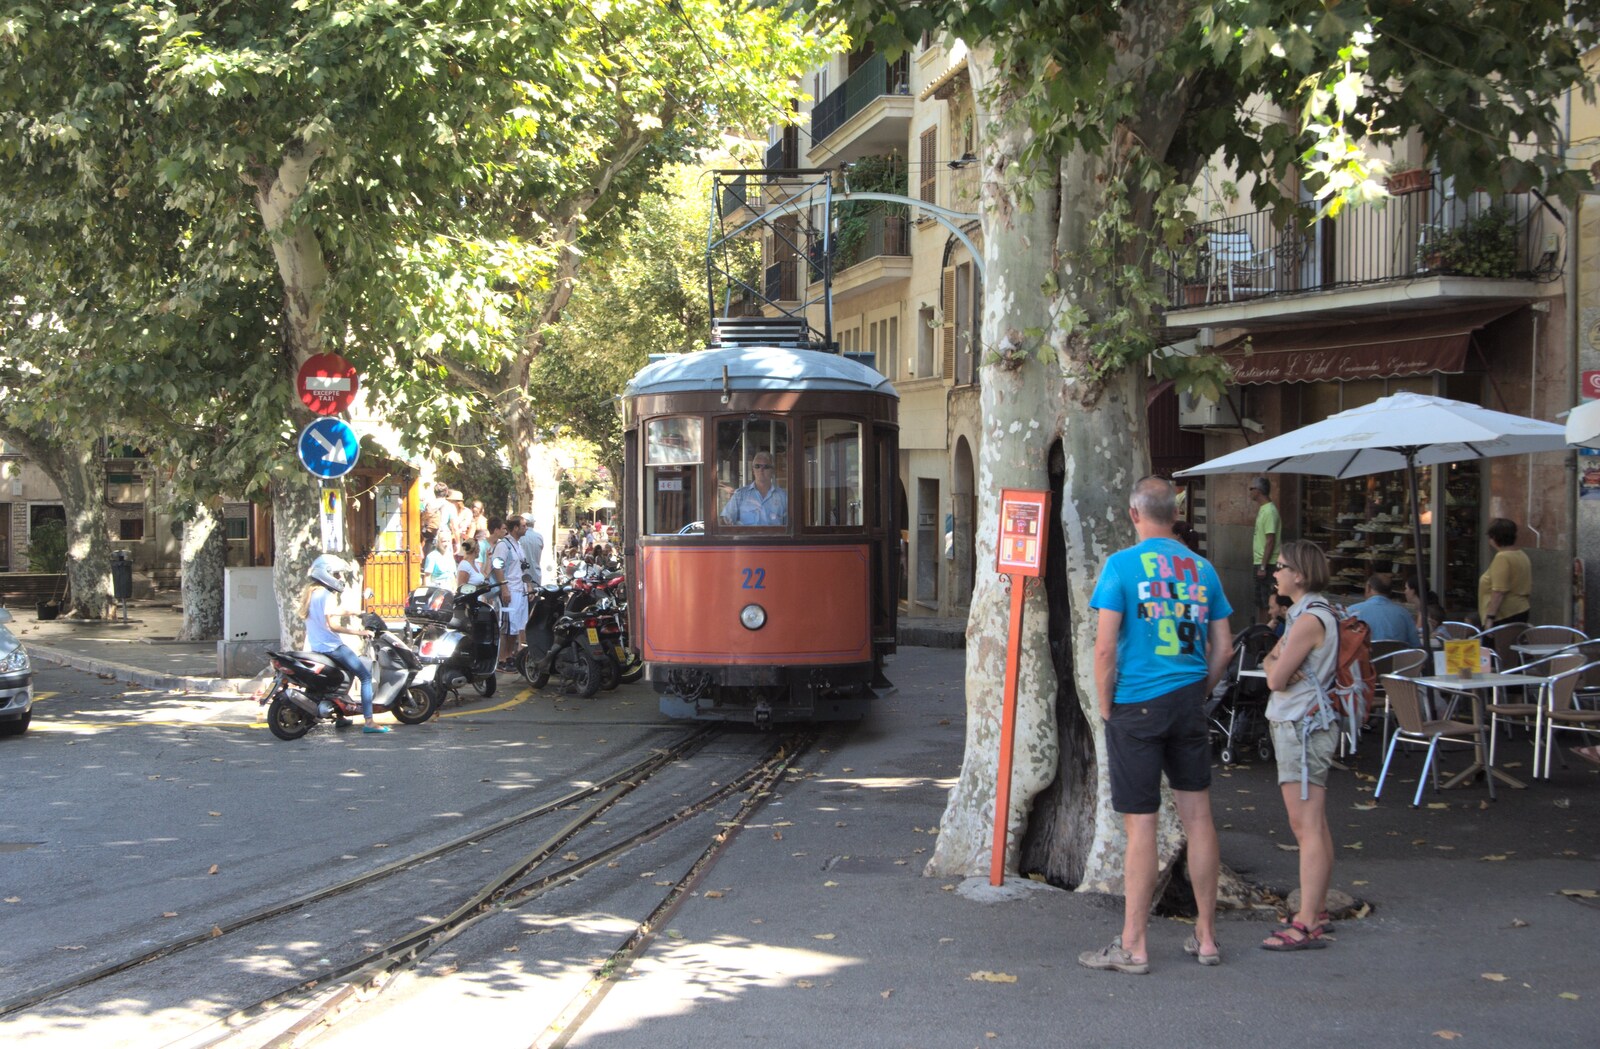 The tram trundles in to the stop from A Tram Trip to Port Soller, Mallorca - 18th August 2011